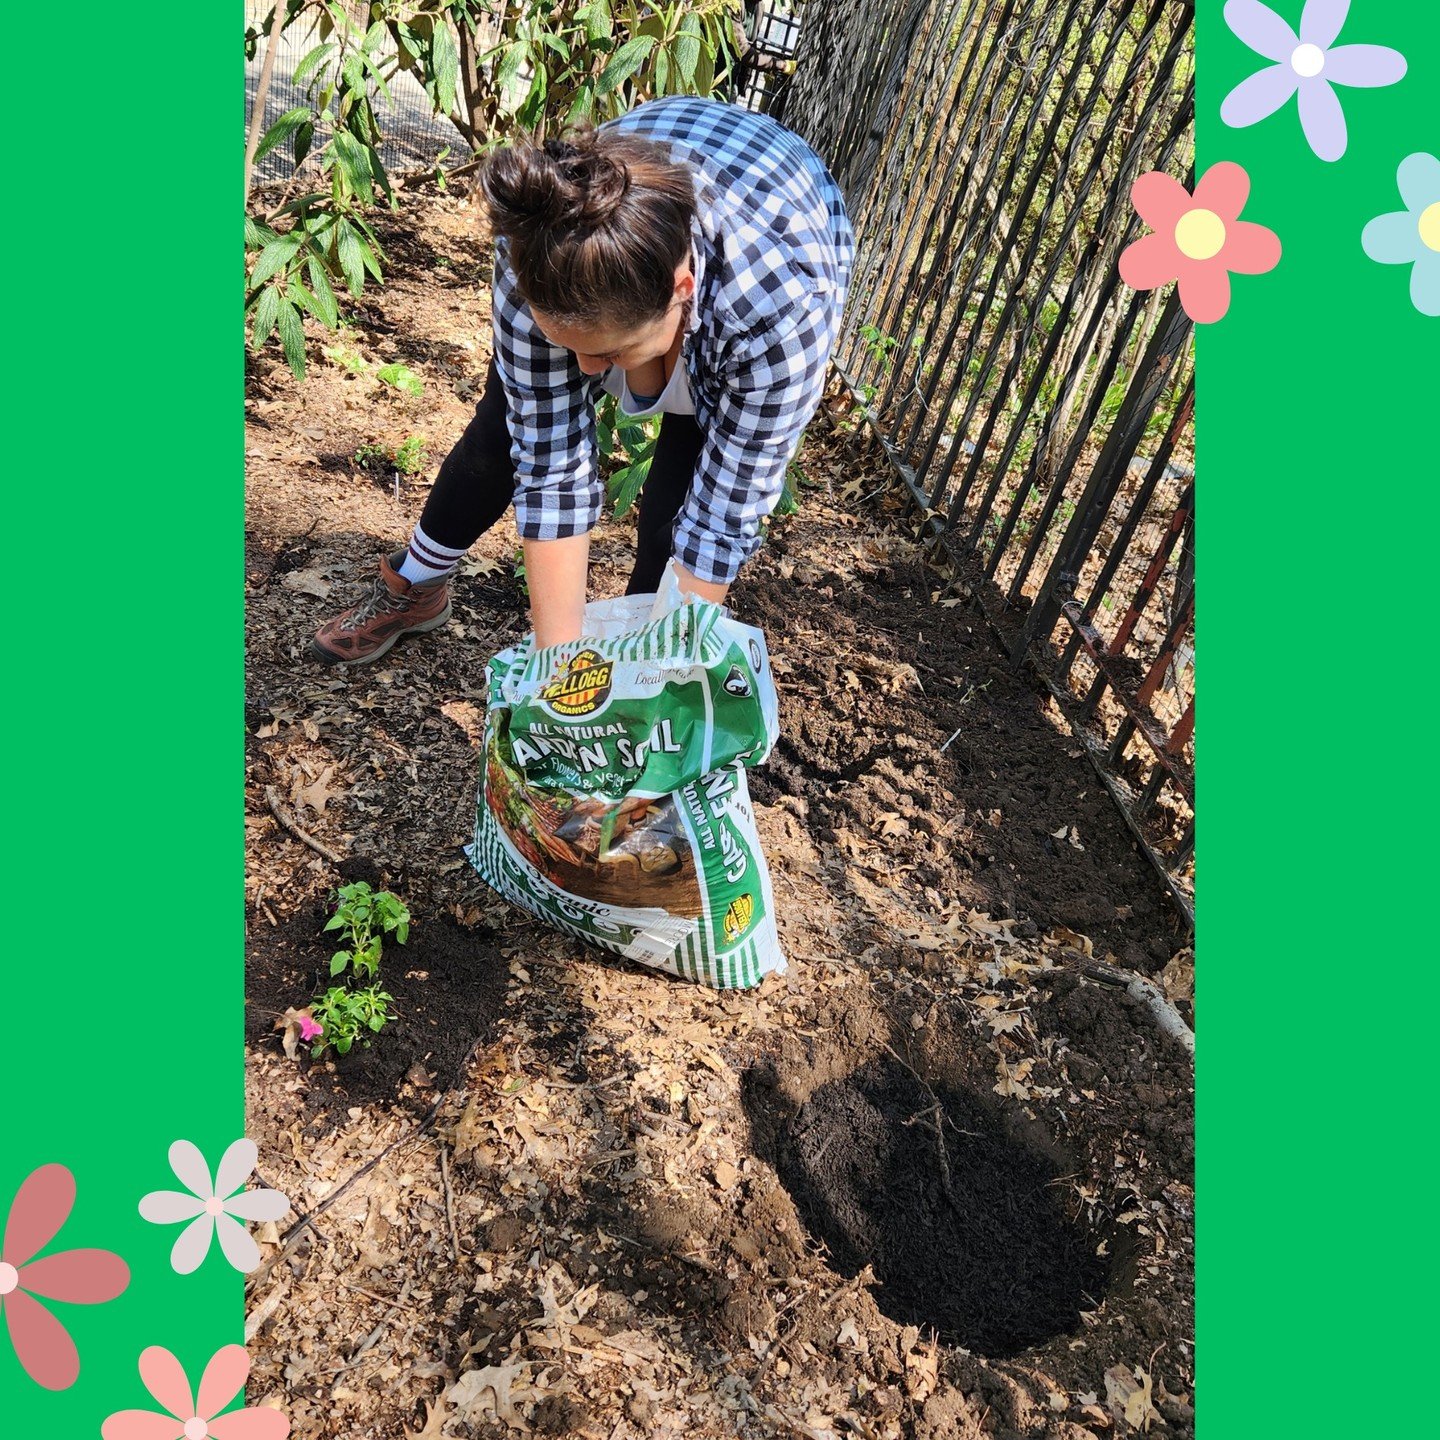 Planting, beautifying and a lot of hard work to celebrate #earthday 🌏 today at Mount Prospect Park 🌳. The event was organized by CuRBA and Friends of Mount Prospect Park with the support of @snappygifts (thank you for the donation) and @partnership